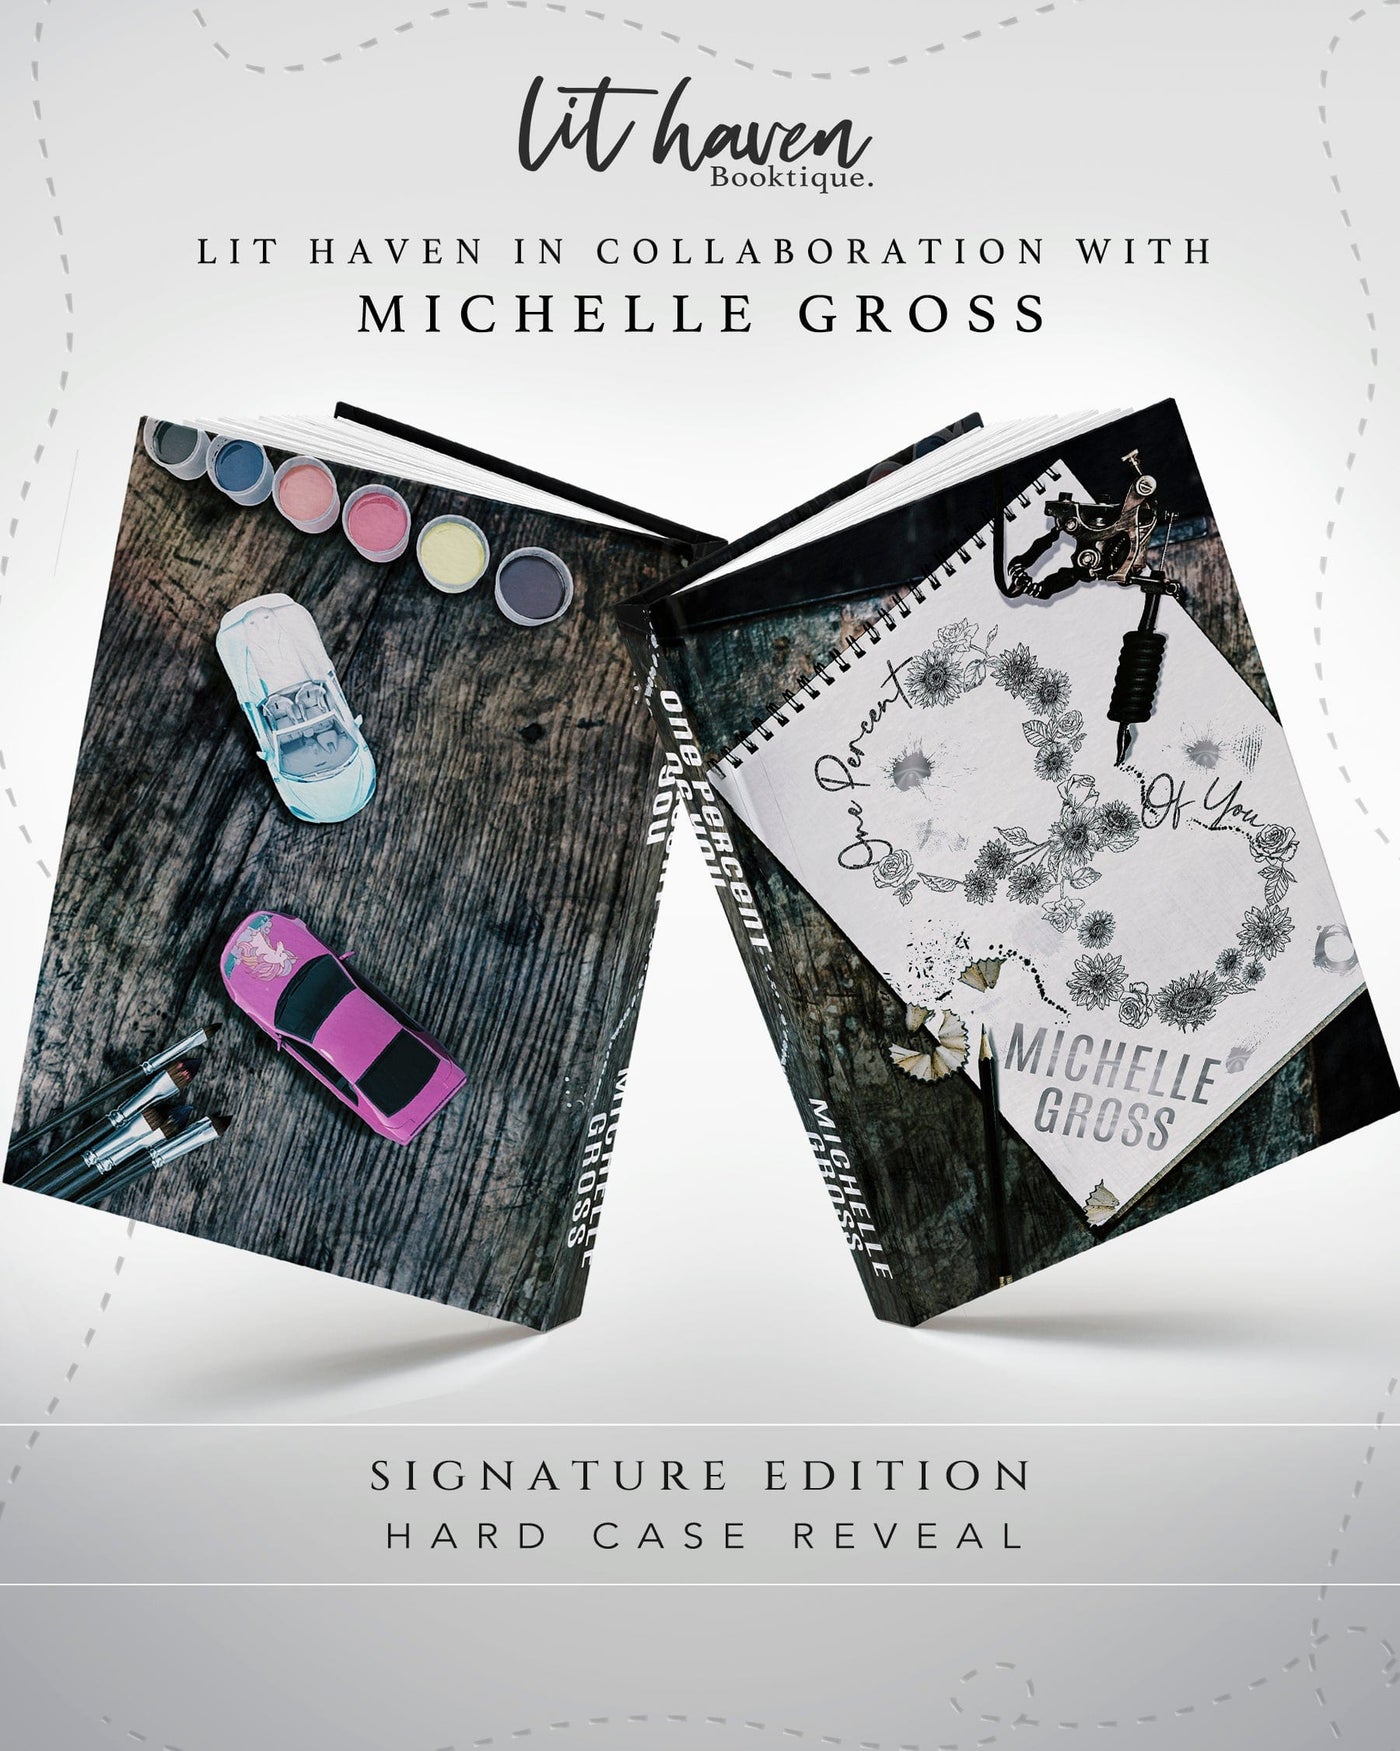 Lit Haven Booktique Book Individual Waitlist | One Percent of You Signature Edition